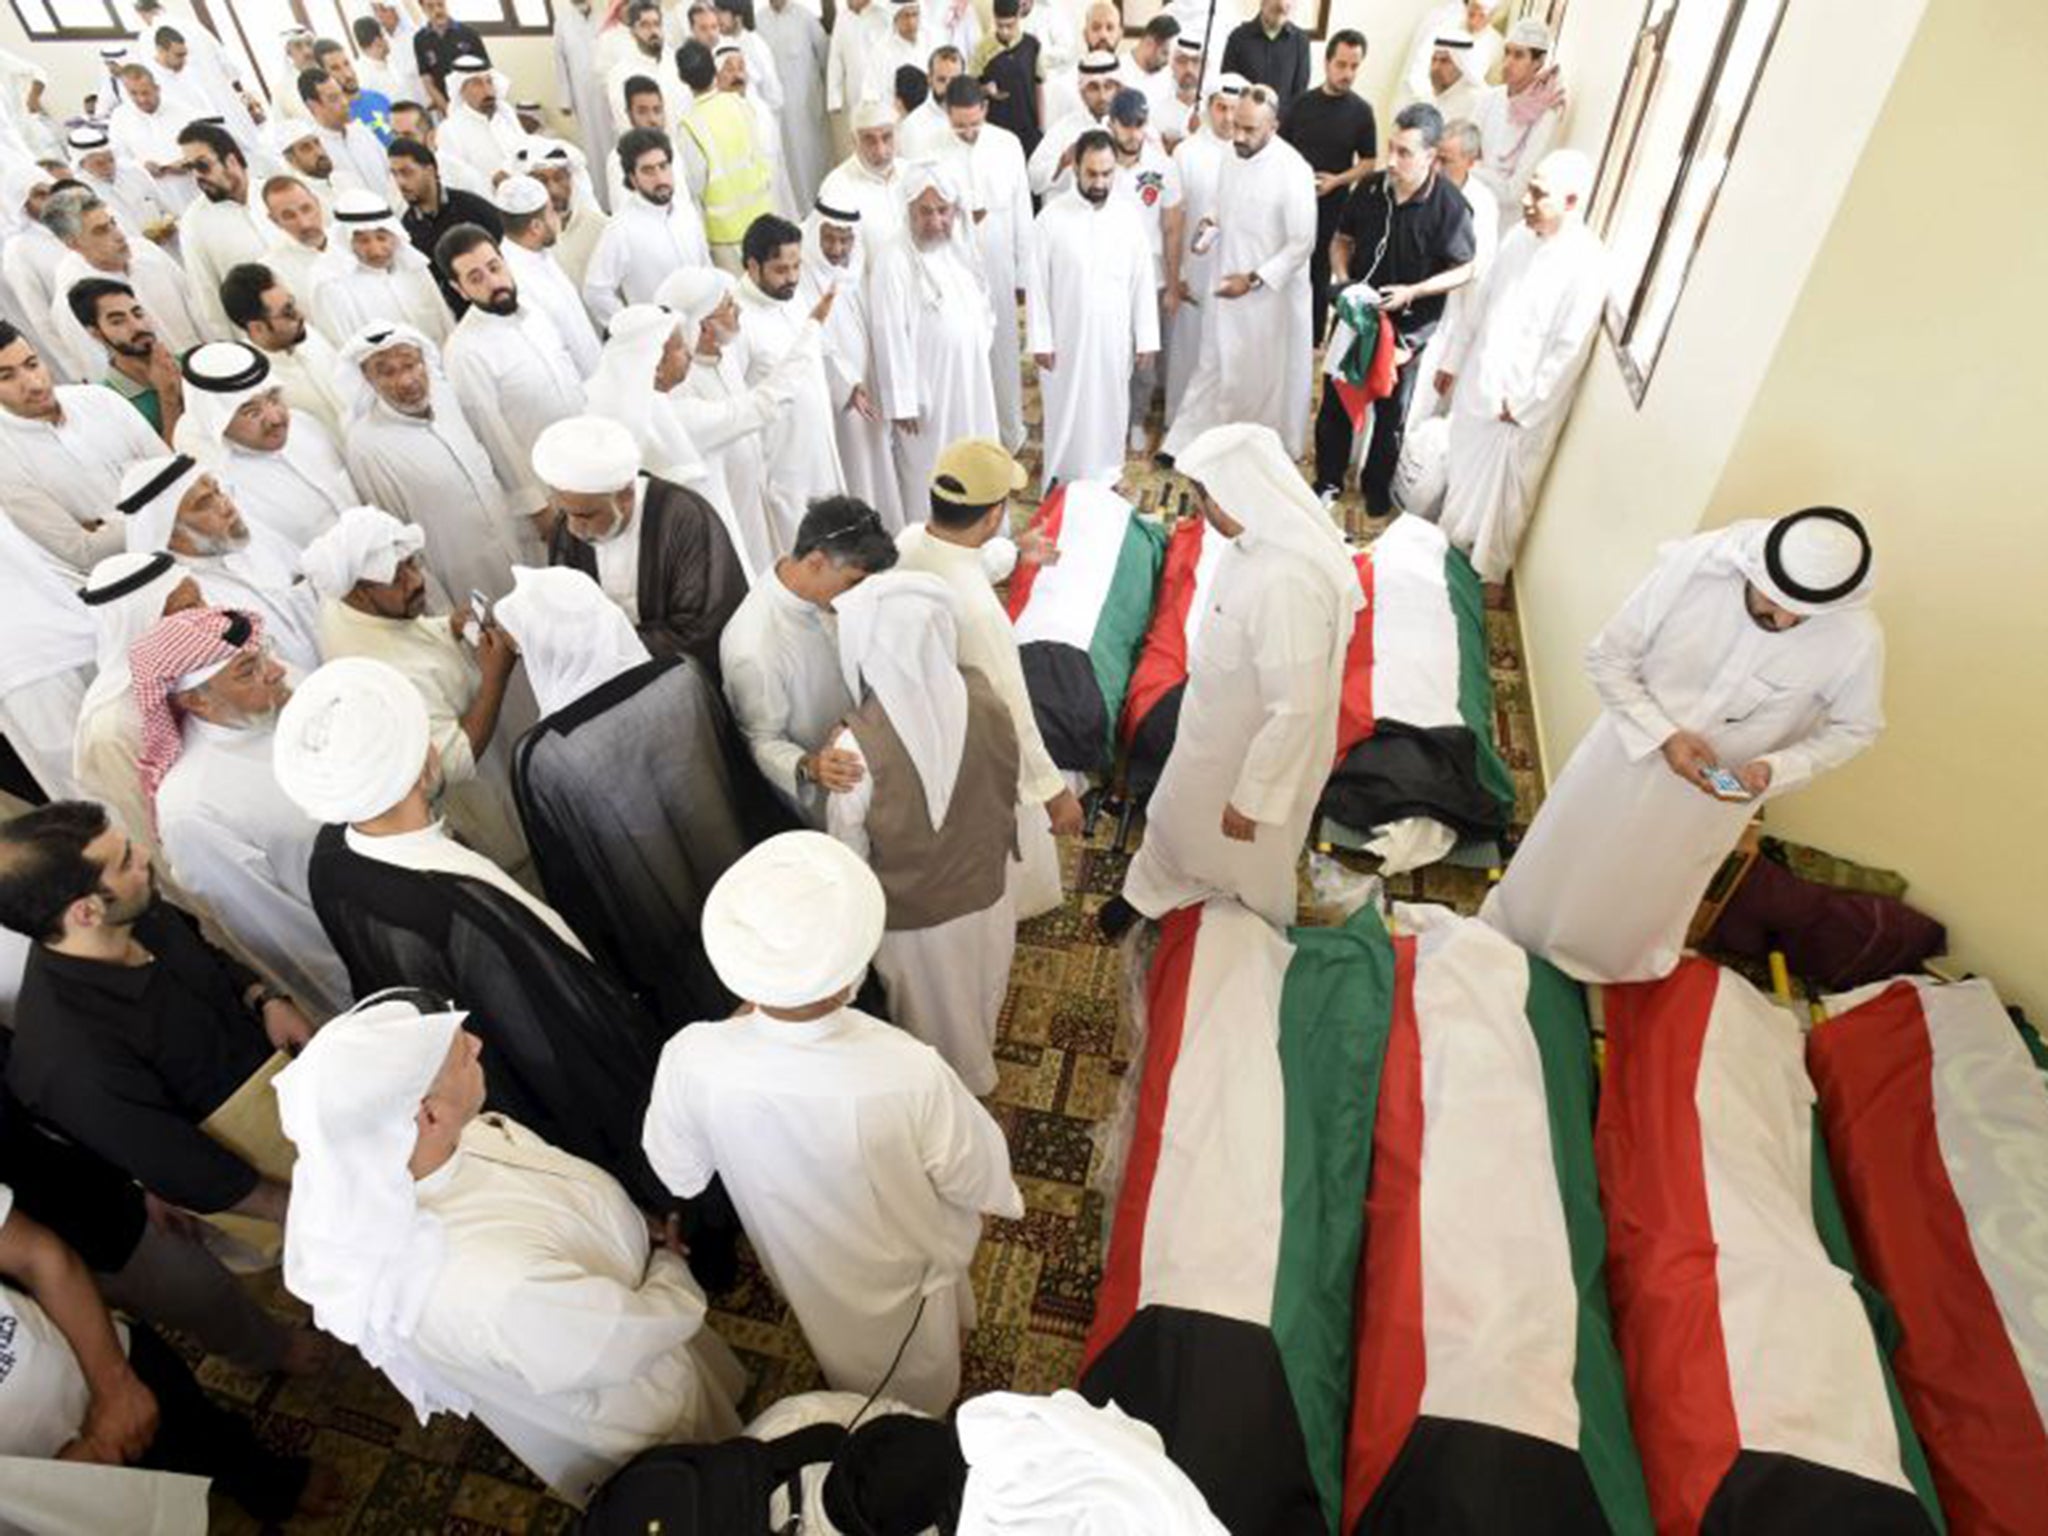 Coffins of some of the 27 people killed by a suicide bomb at a mosque in Kuwait City on Friday